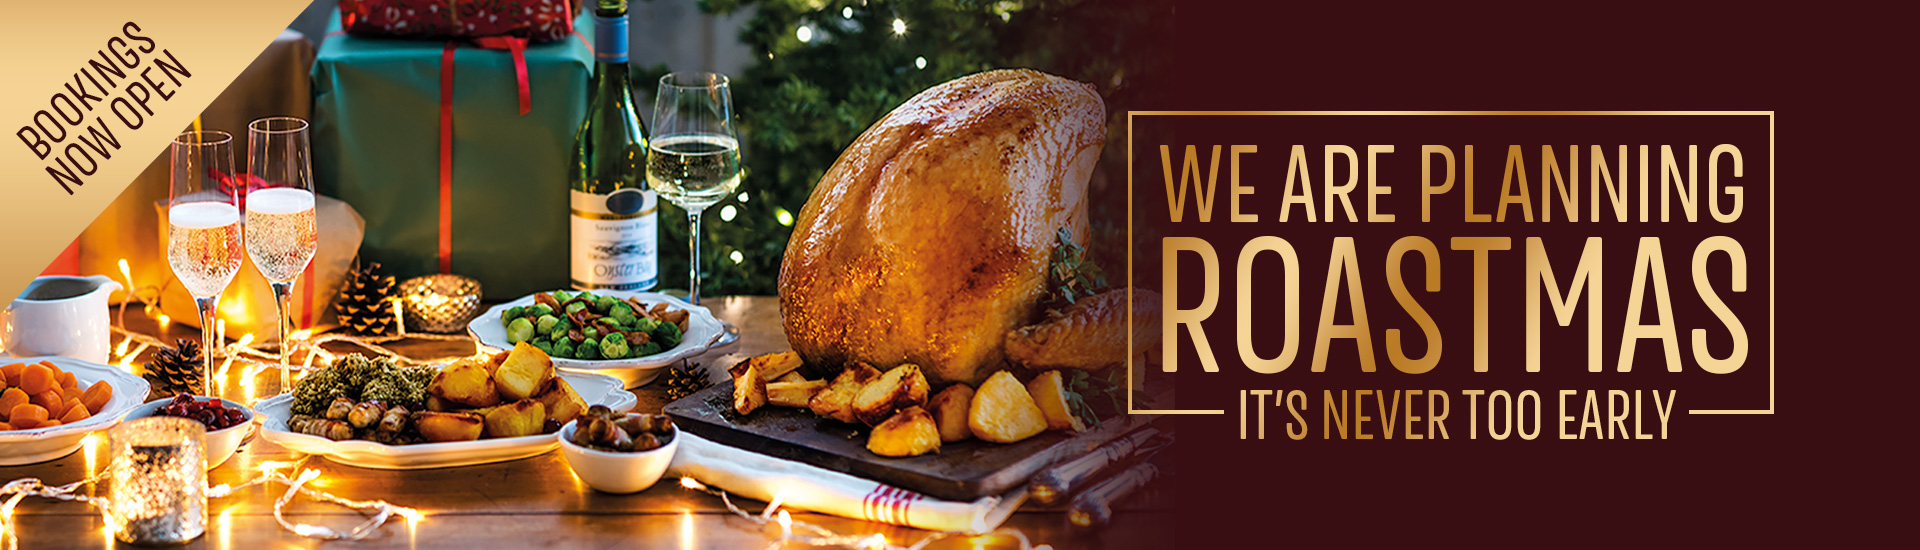 Christmas 2022 at your local Toby Carvery Basildon | Home of the Roast